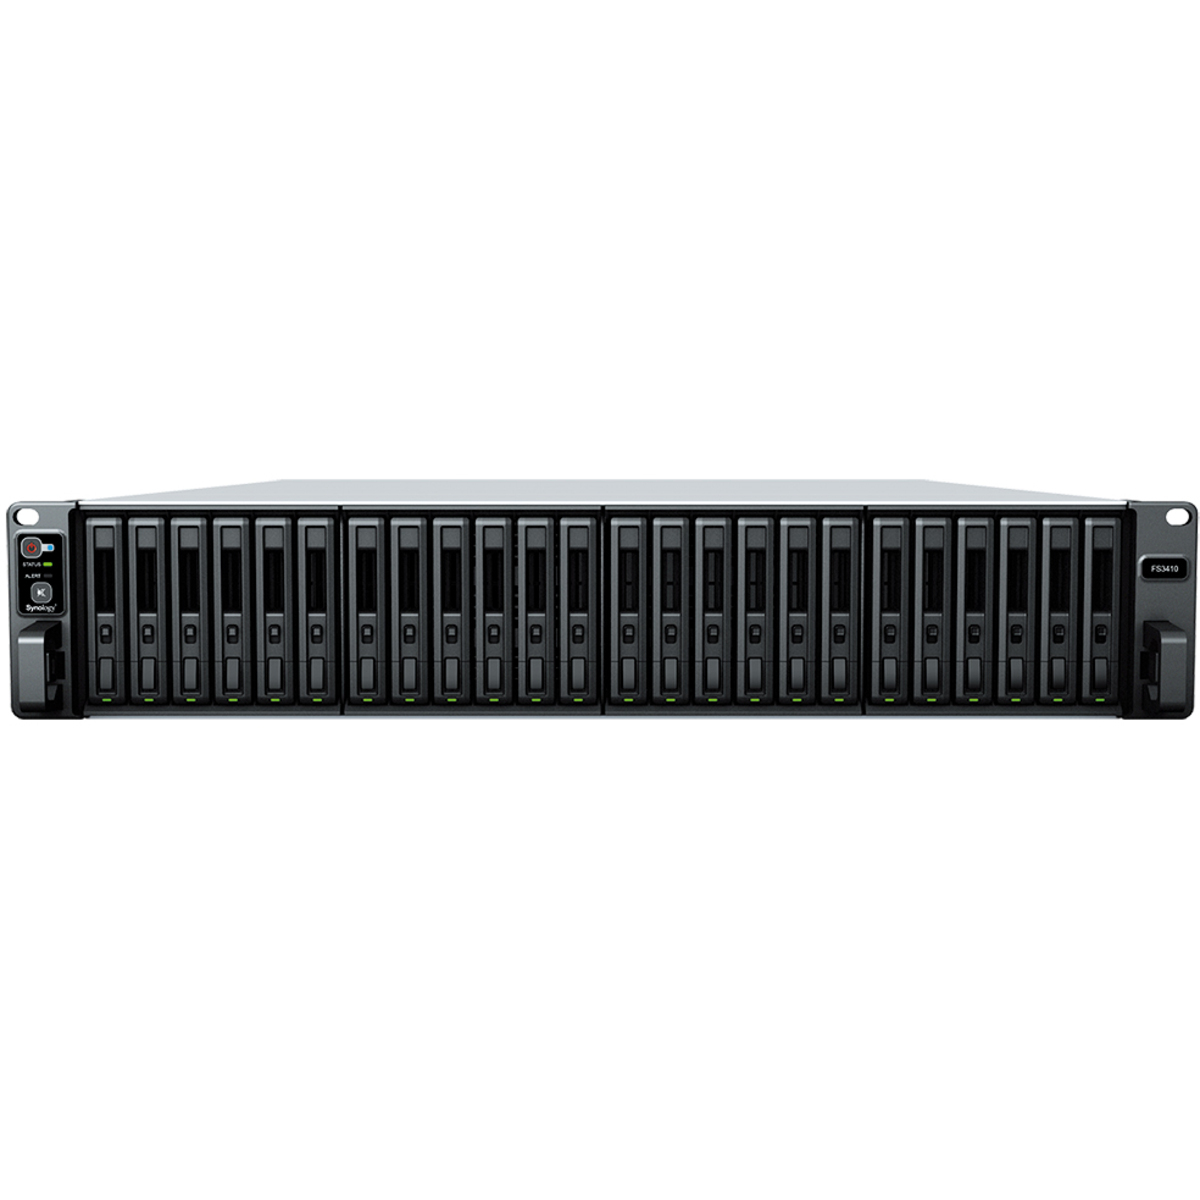 Synology FlashStation FS3410 92tb 24-Bay RackMount Large Business / Enterprise NAS - Network Attached Storage Device 23x4tb Samsung 870 EVO MZ-77E4T0BAM 2.5 560/530MB/s SATA 6Gb/s SSD CONSUMER Class Drives Installed - Burn-In Tested - ON SALE FlashStation FS3410